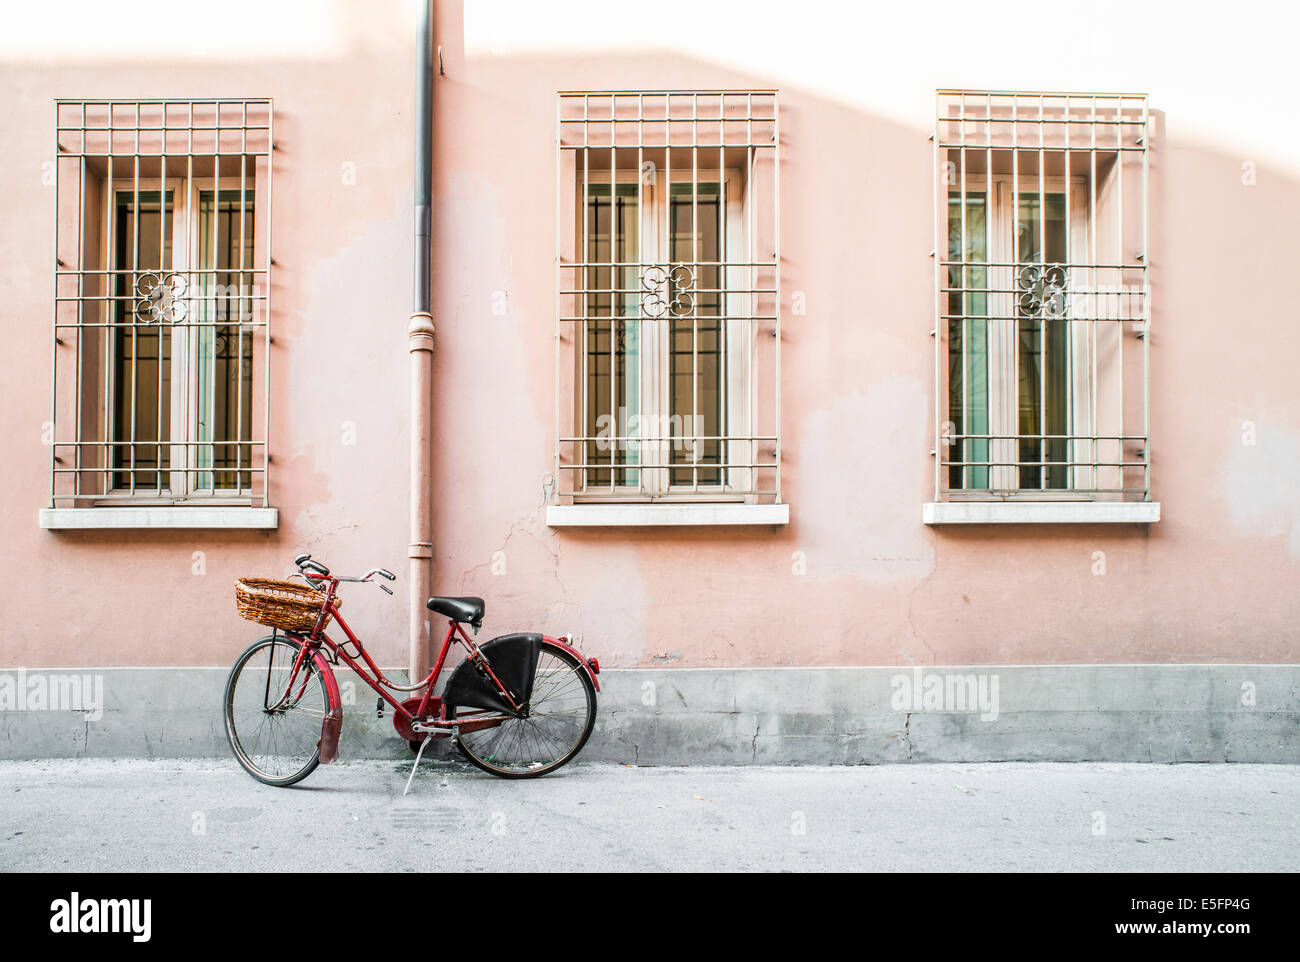 Red old Italian bicycle on sunlight. Ancient buildings Stock Photo